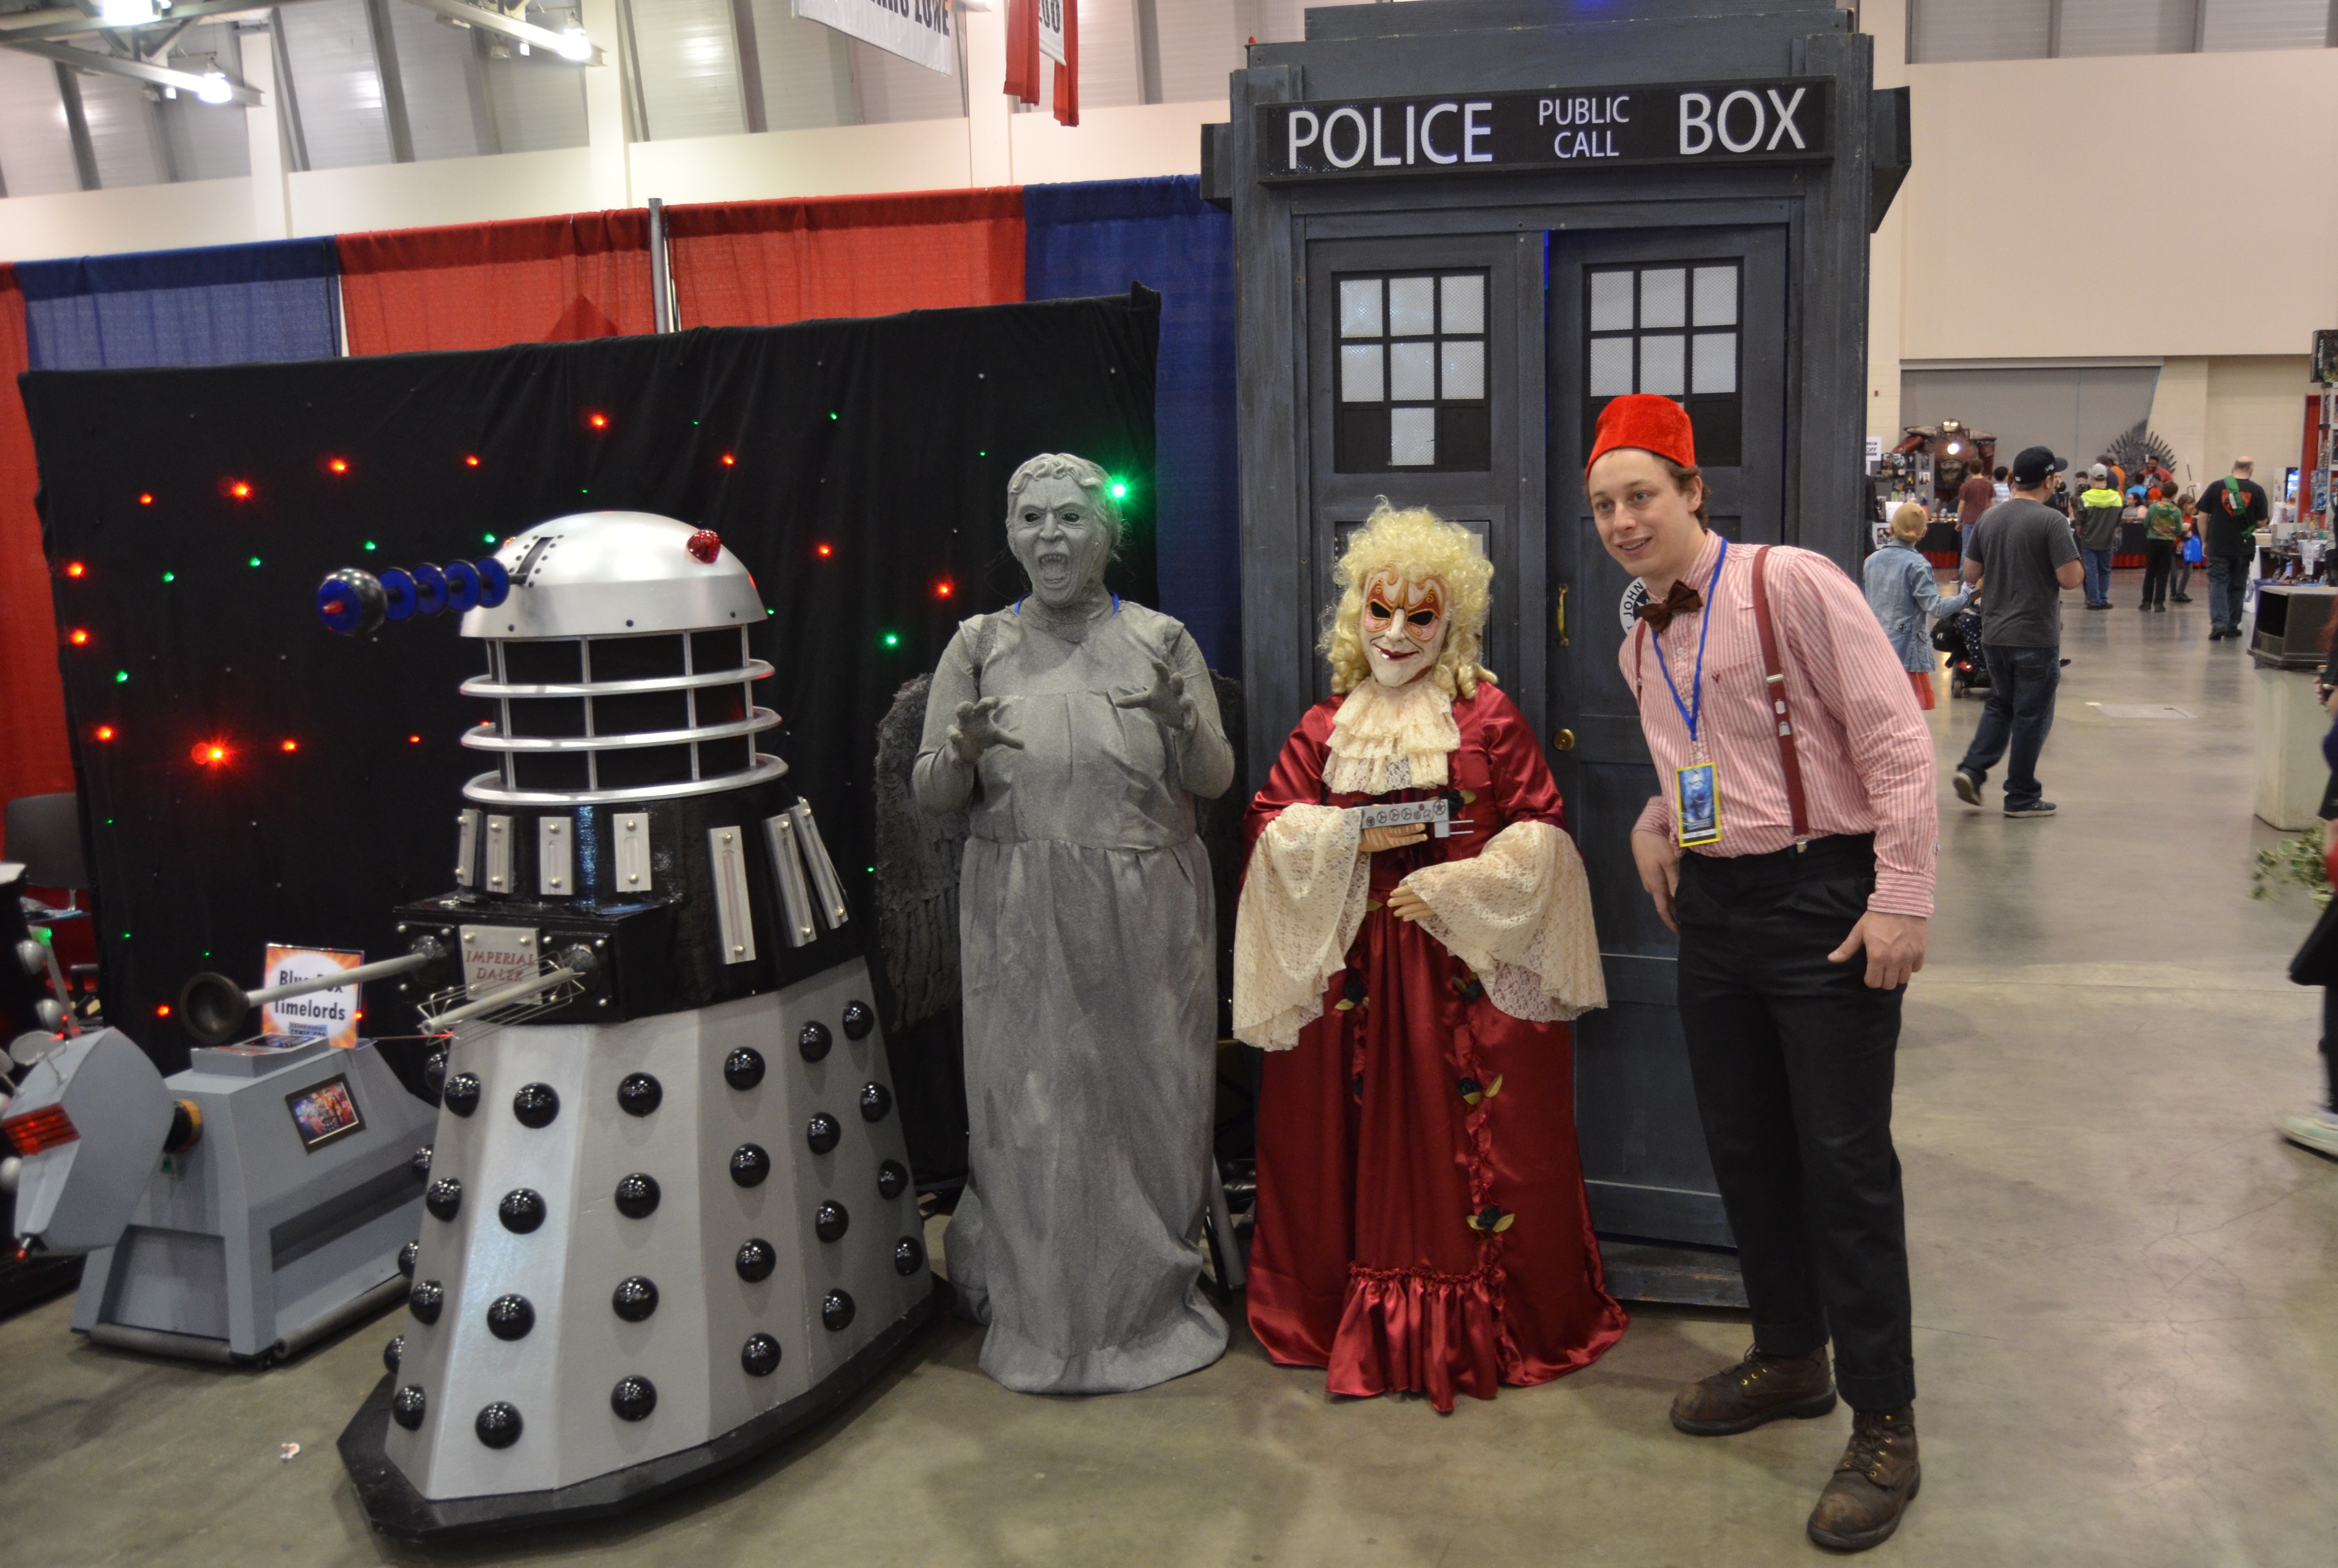 The Doctor Who booth